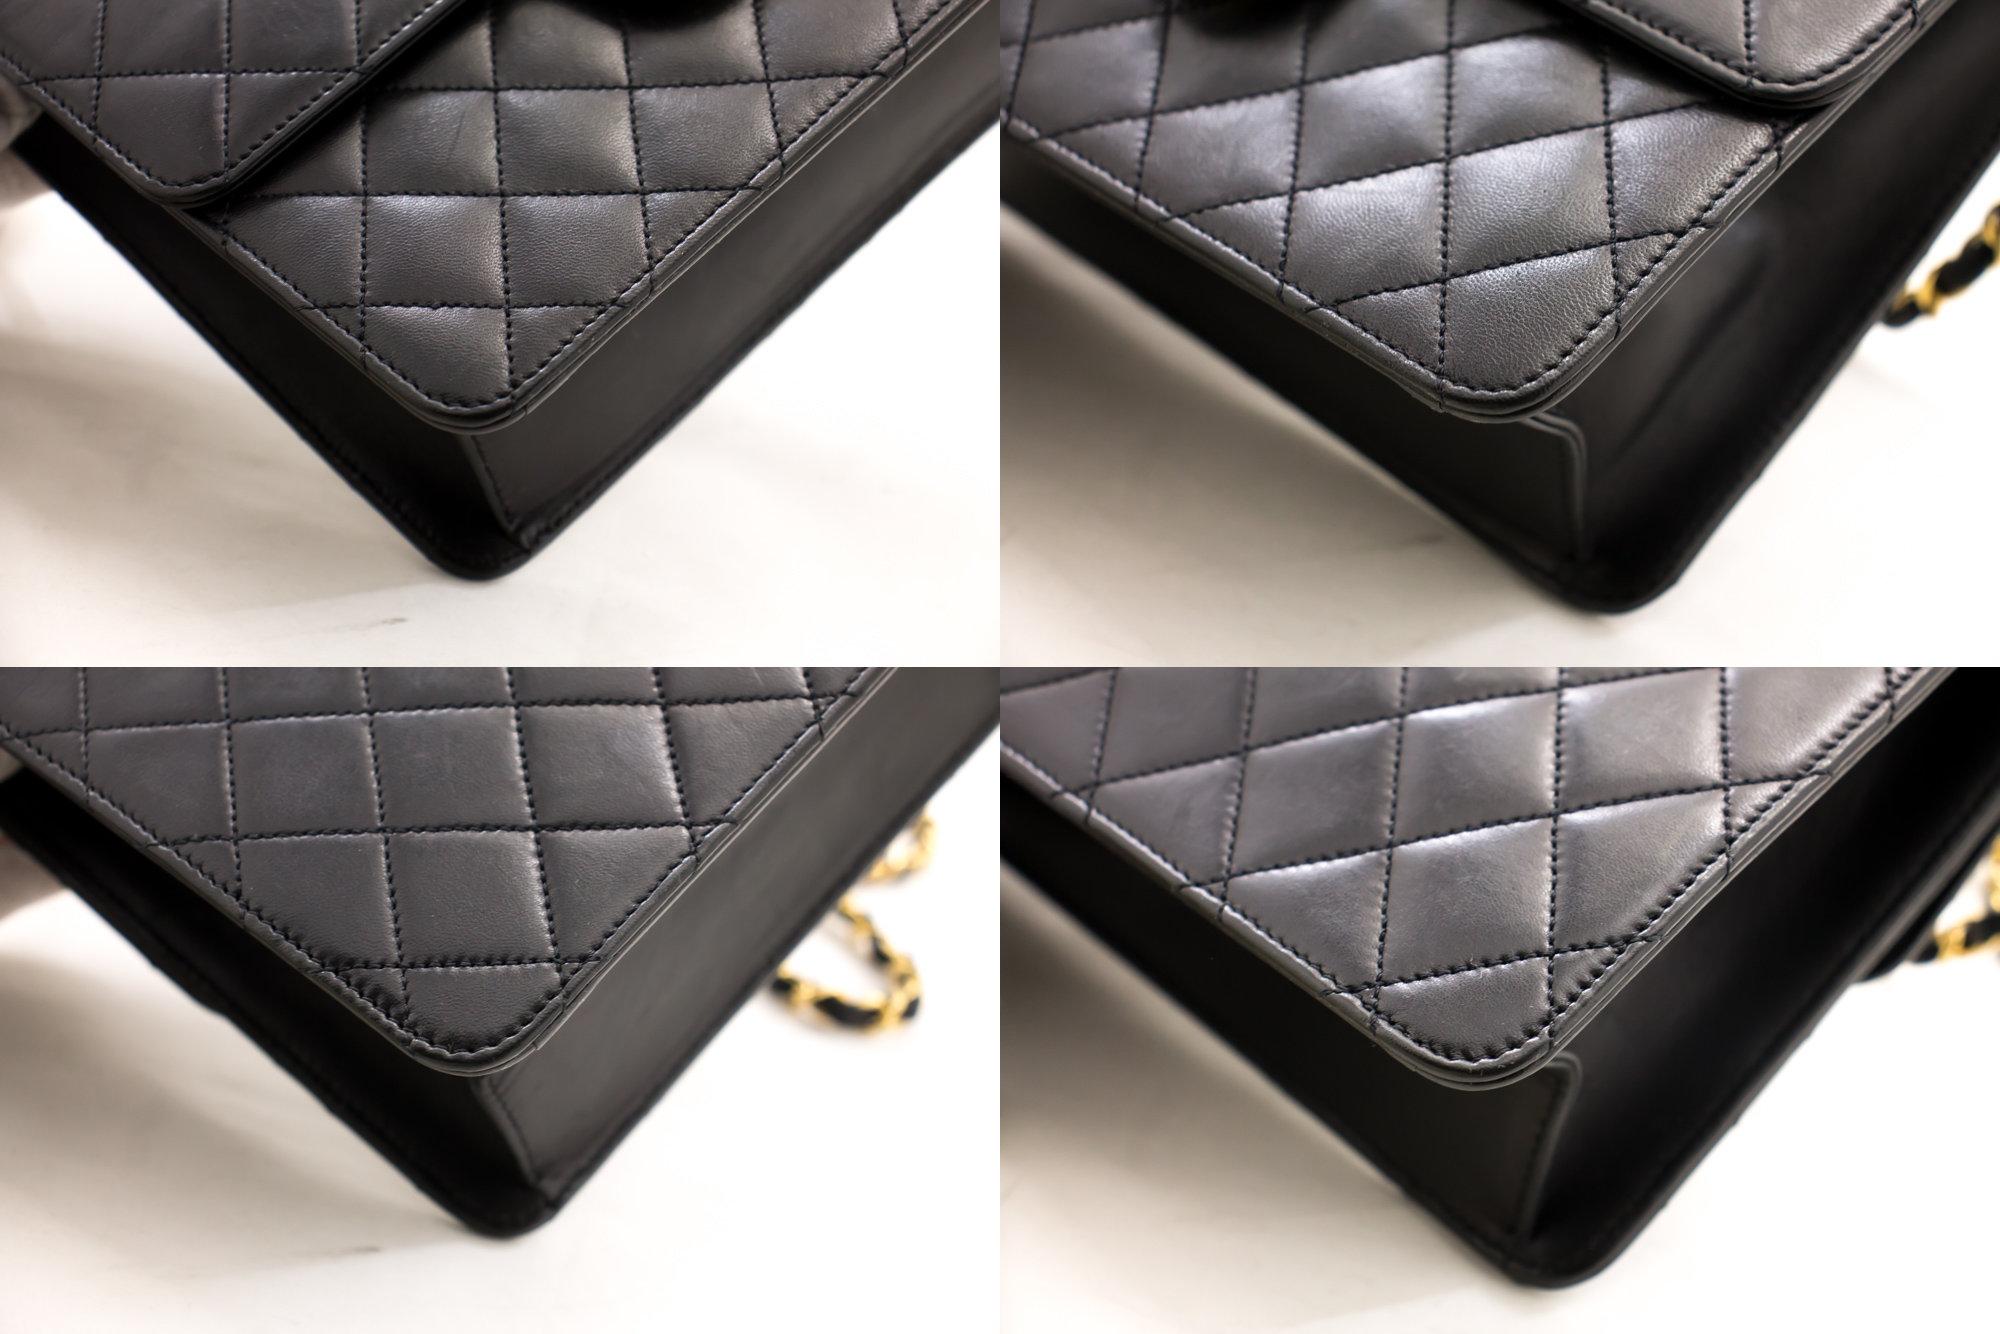 CHANEL Small Chain Shoulder Bag Black Clutch Flap Quilted Lambskin 2